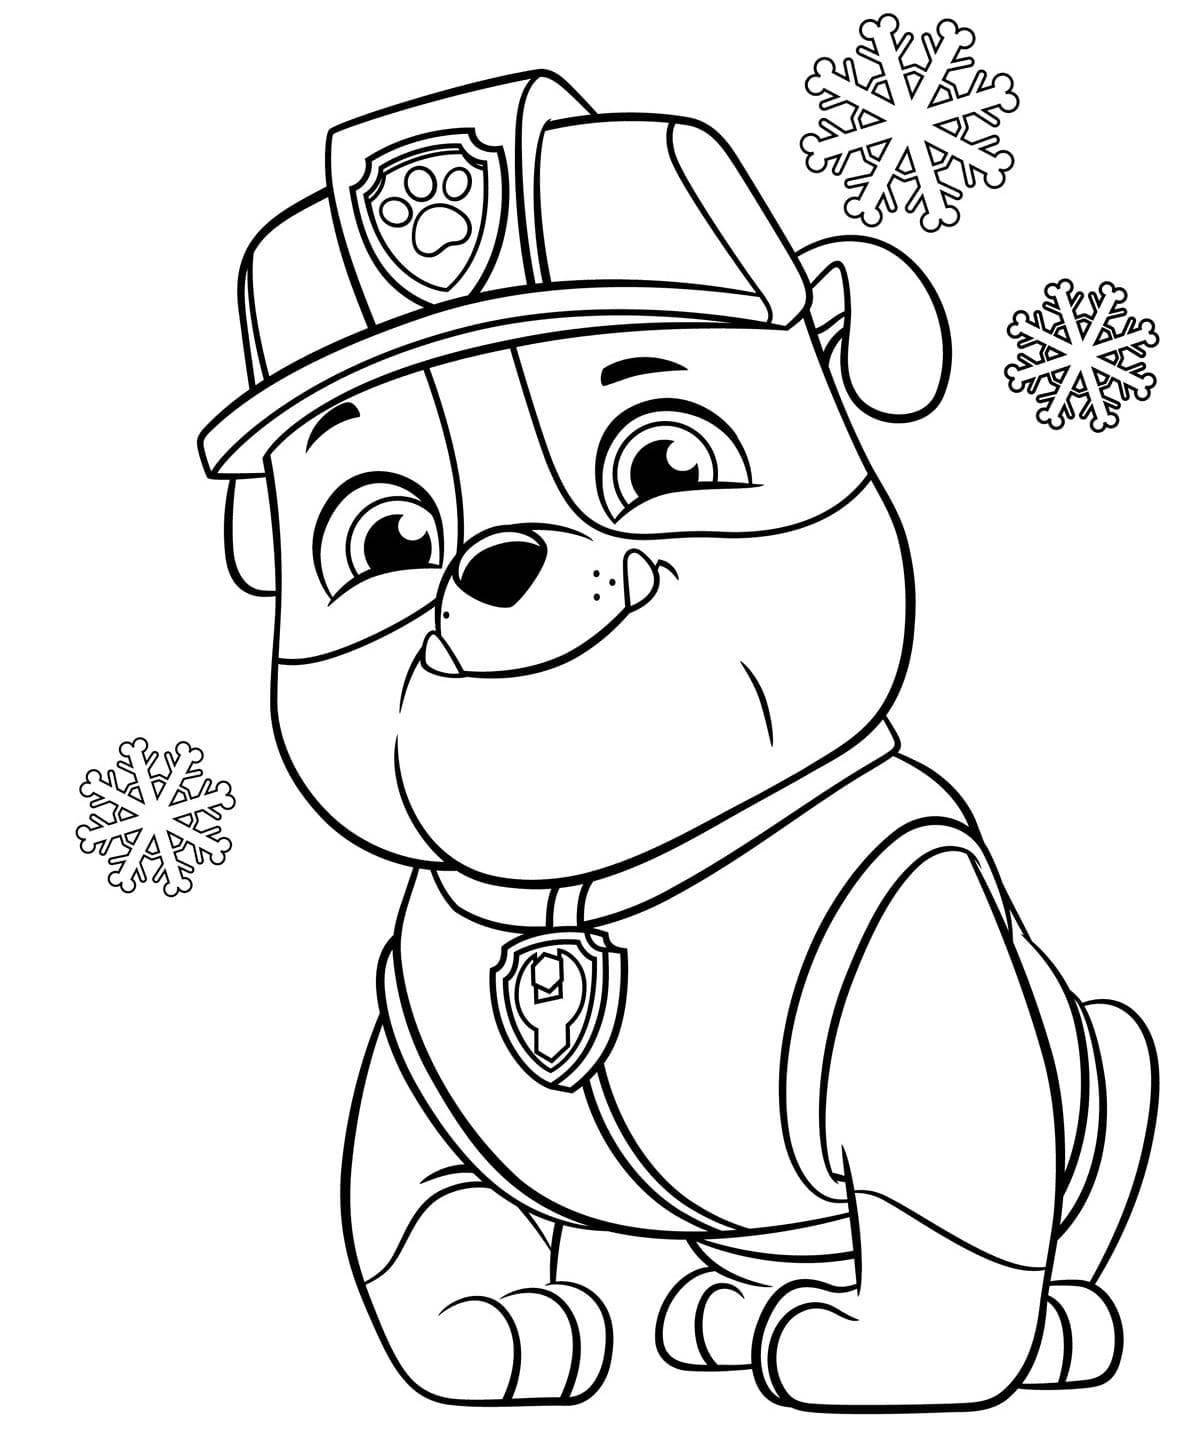 Awesome Paw Patrol Coloring Page